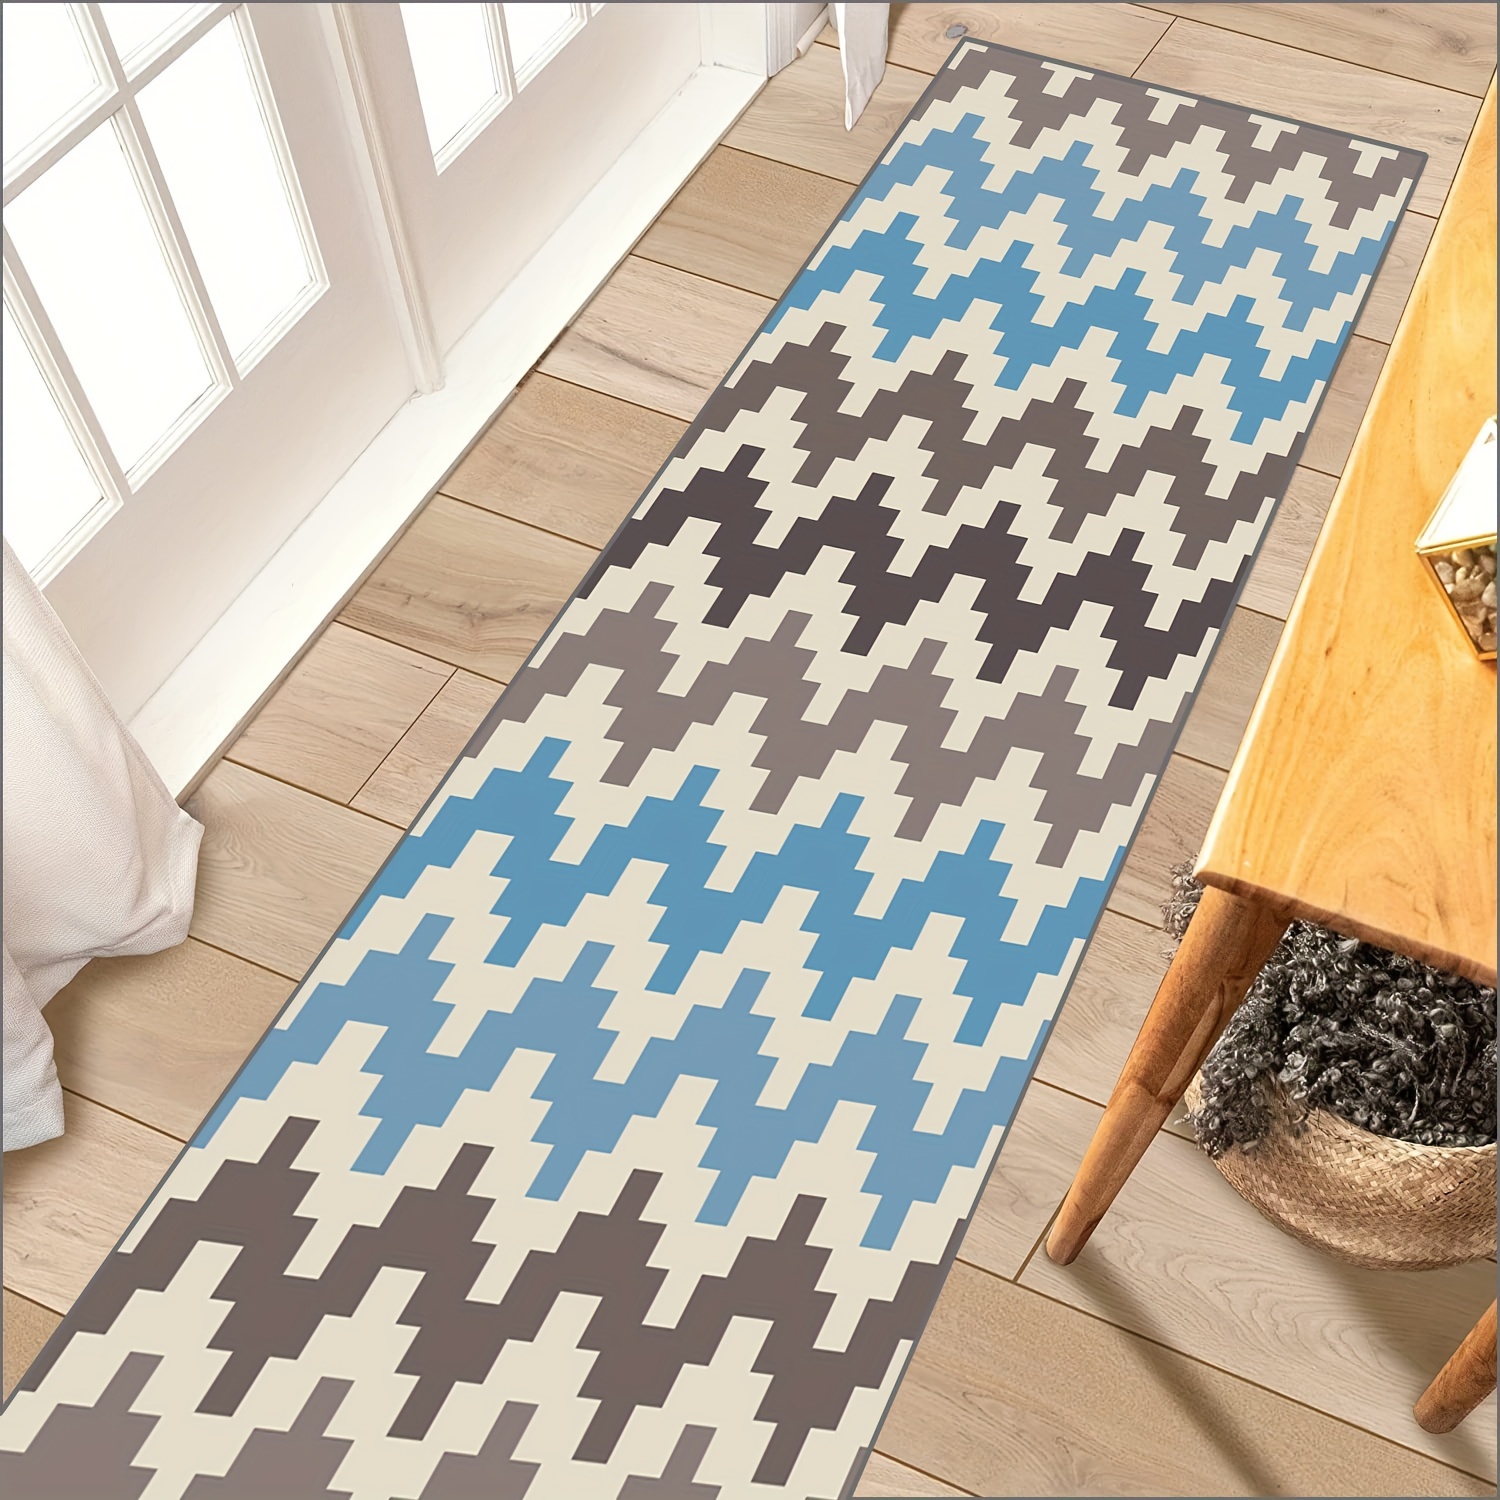 Teal Kitchen Rugs and Mats Non Skid Washable, Kitchen Mat Set of 2